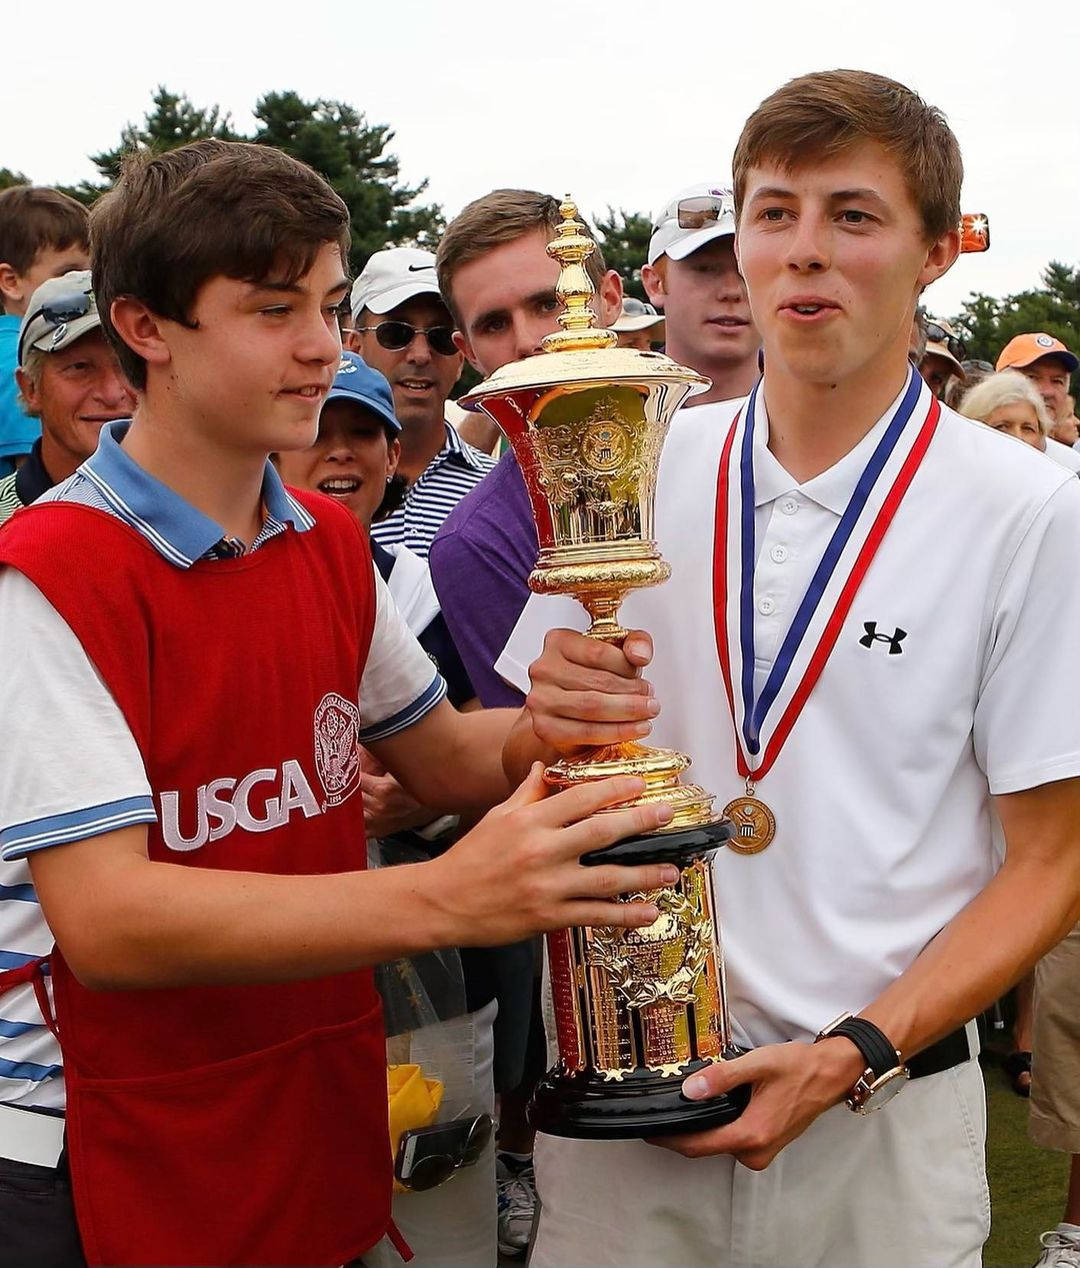 Matt Fitzpatrick And Brother Hold Trophy Background